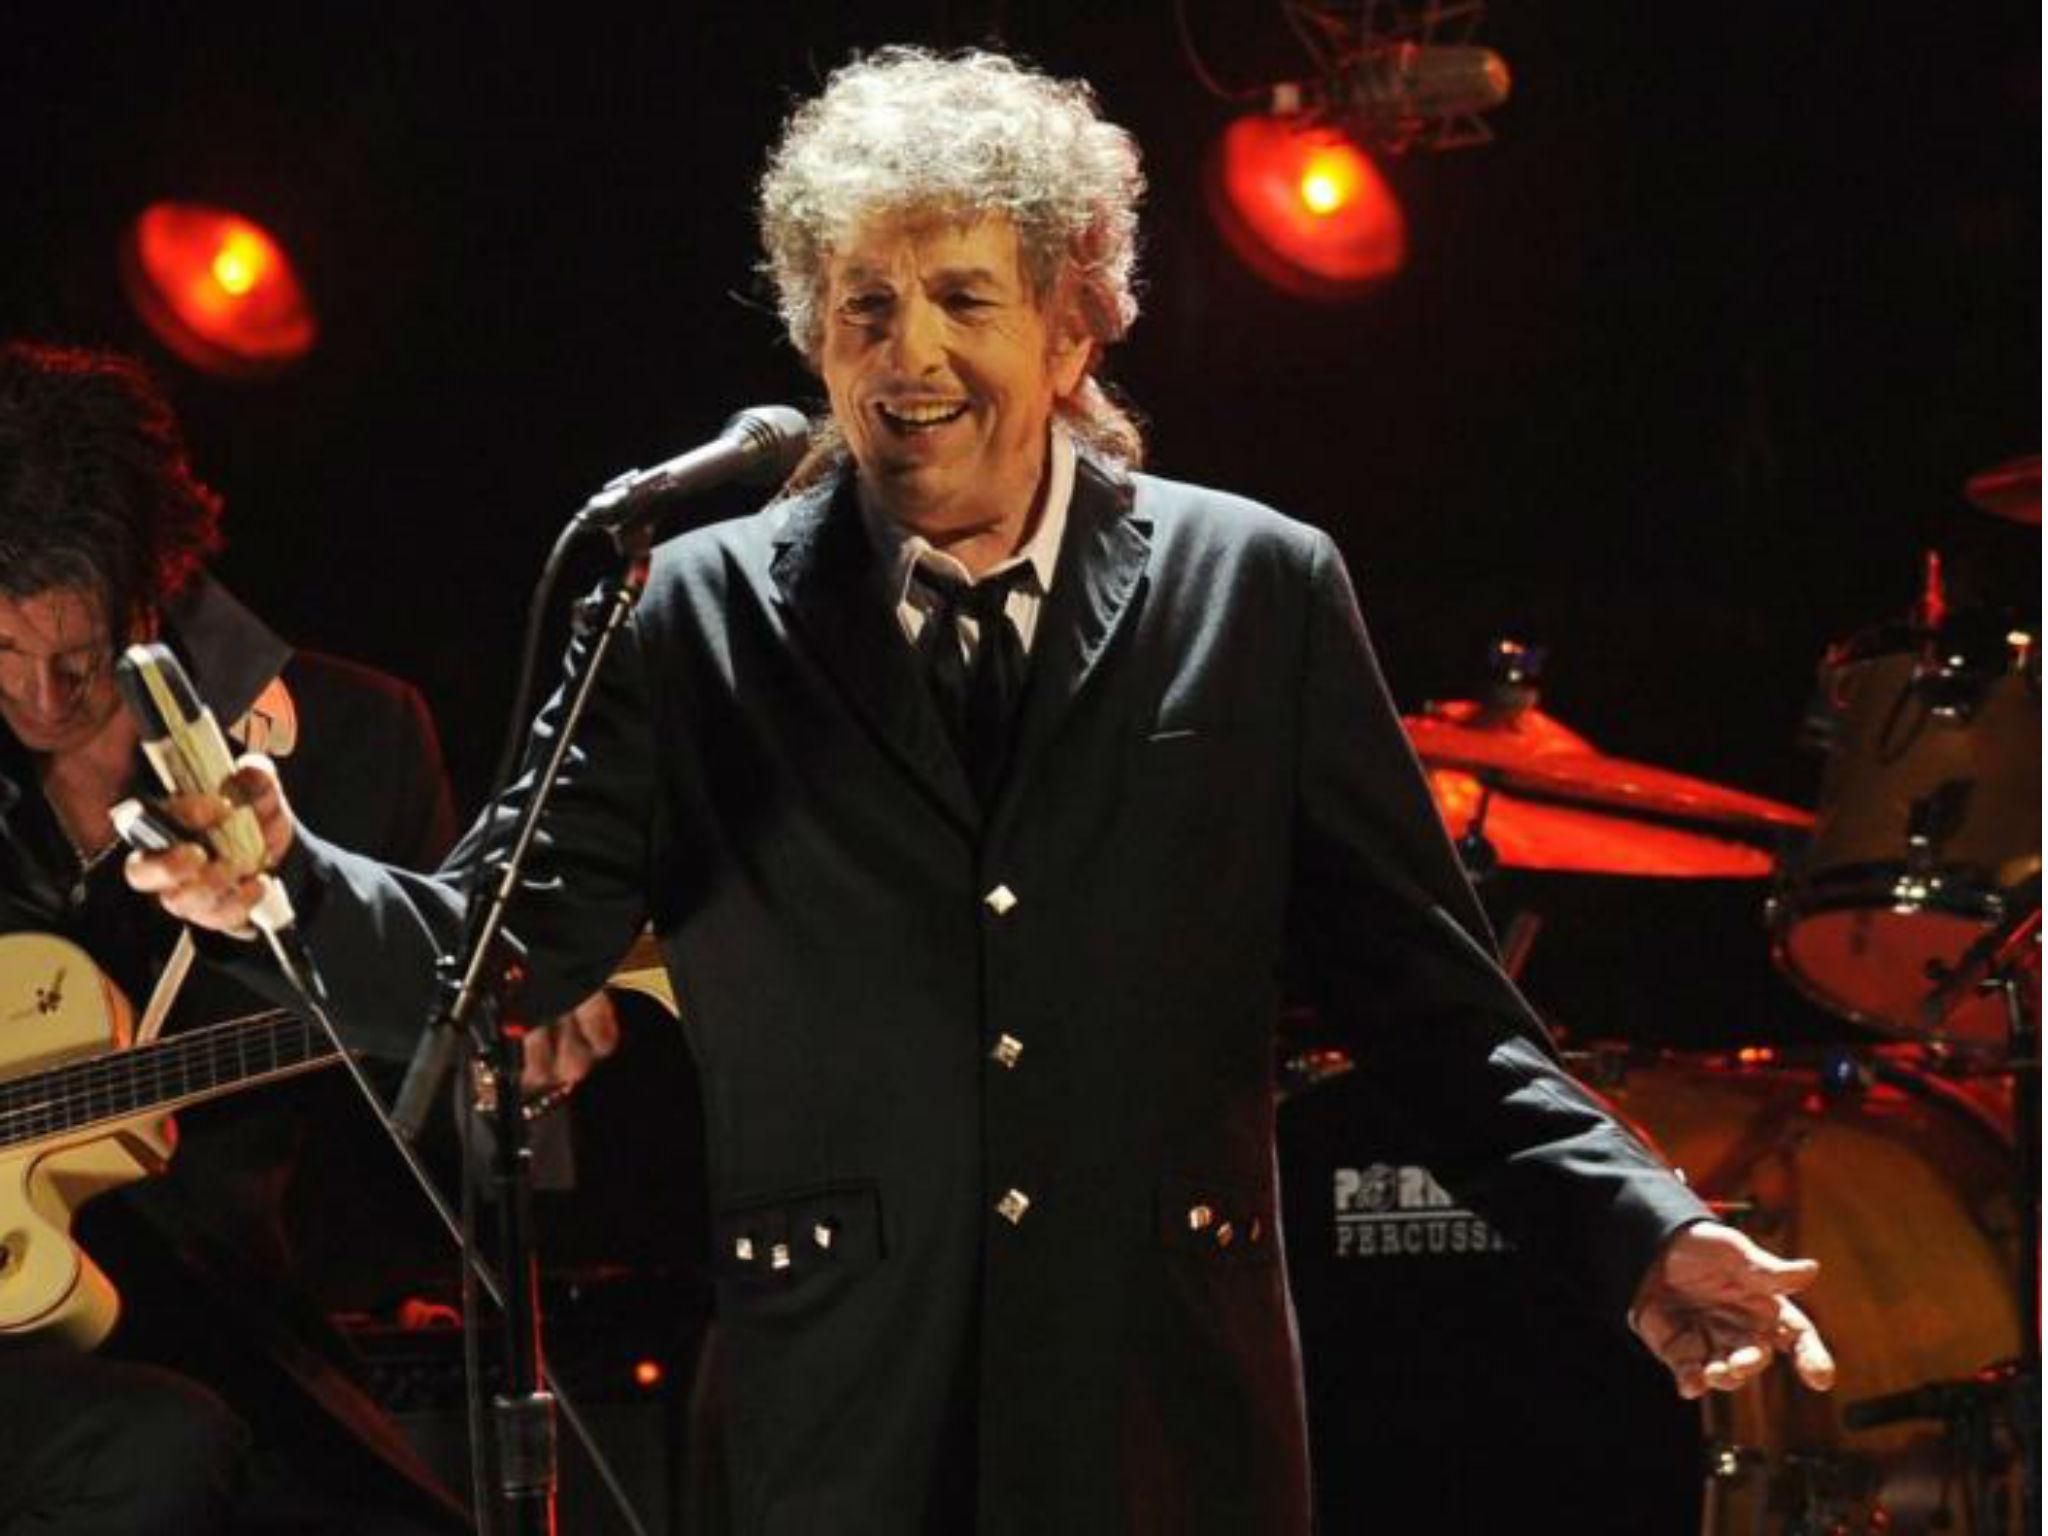 At 75, Bob Dylan is releasing his first triple album, a mammoth 30-track undertaking